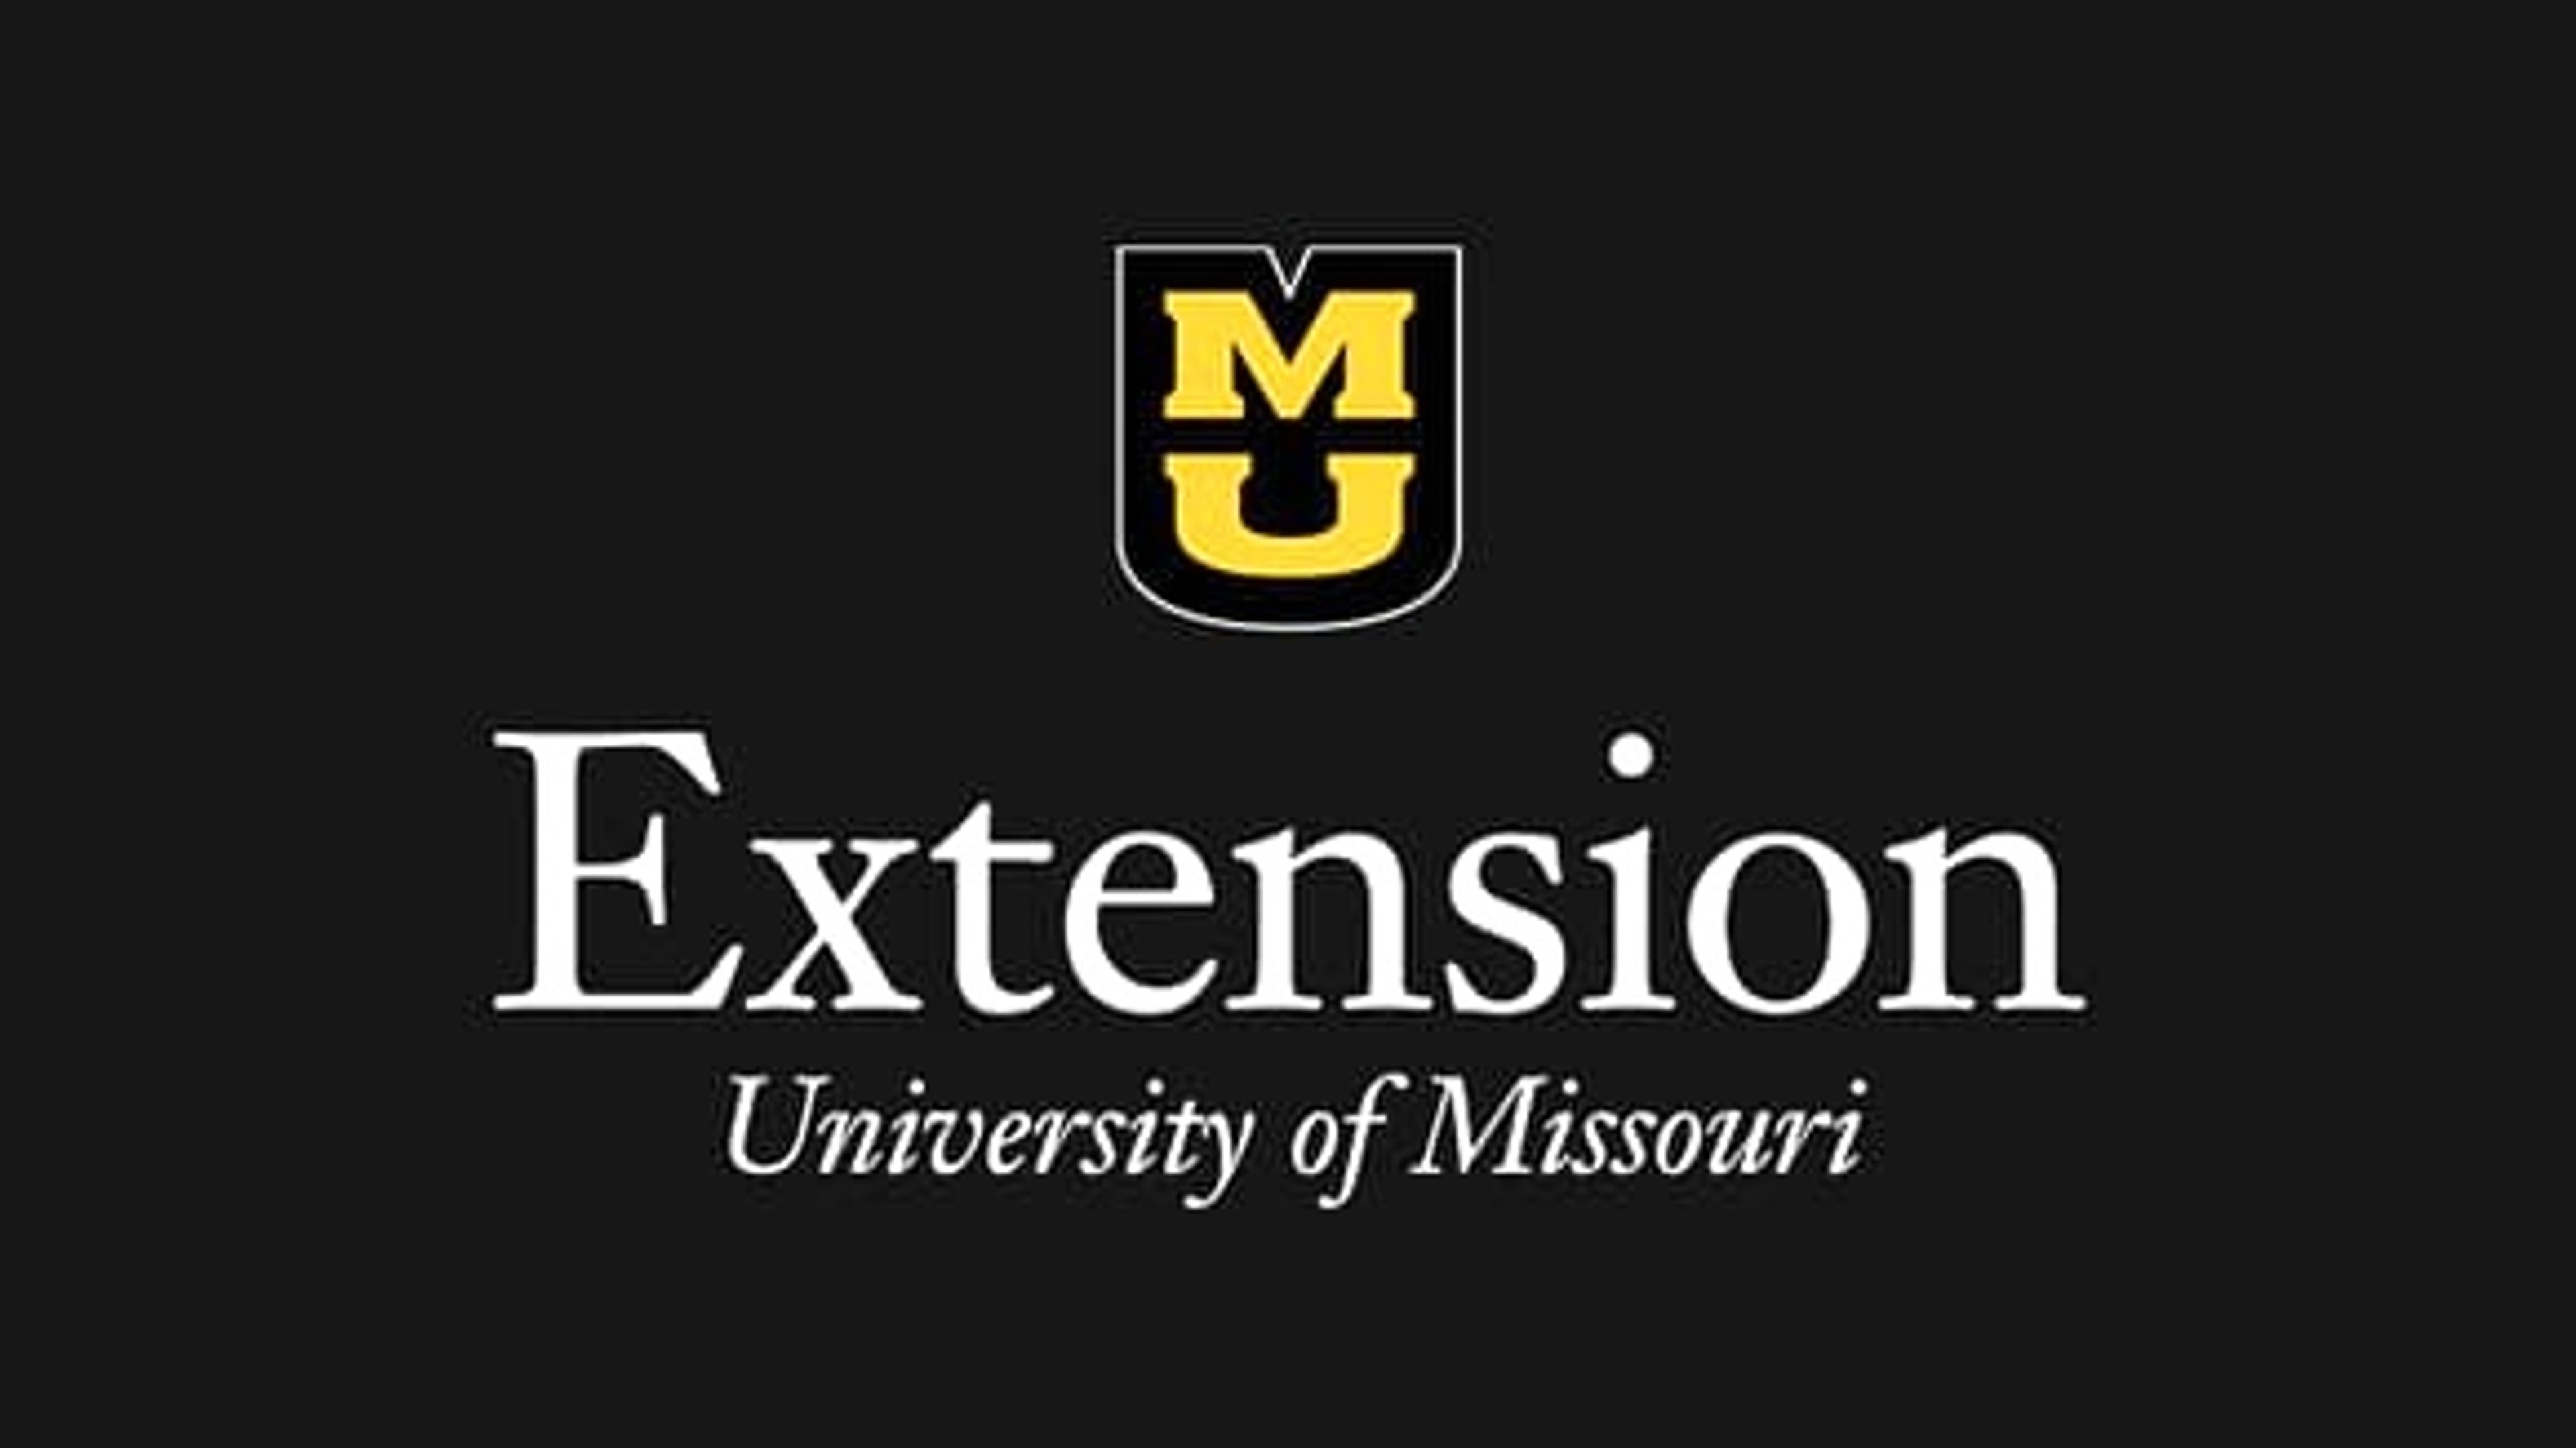 Become a certified Master Gardener with MU Extension's flexible online training